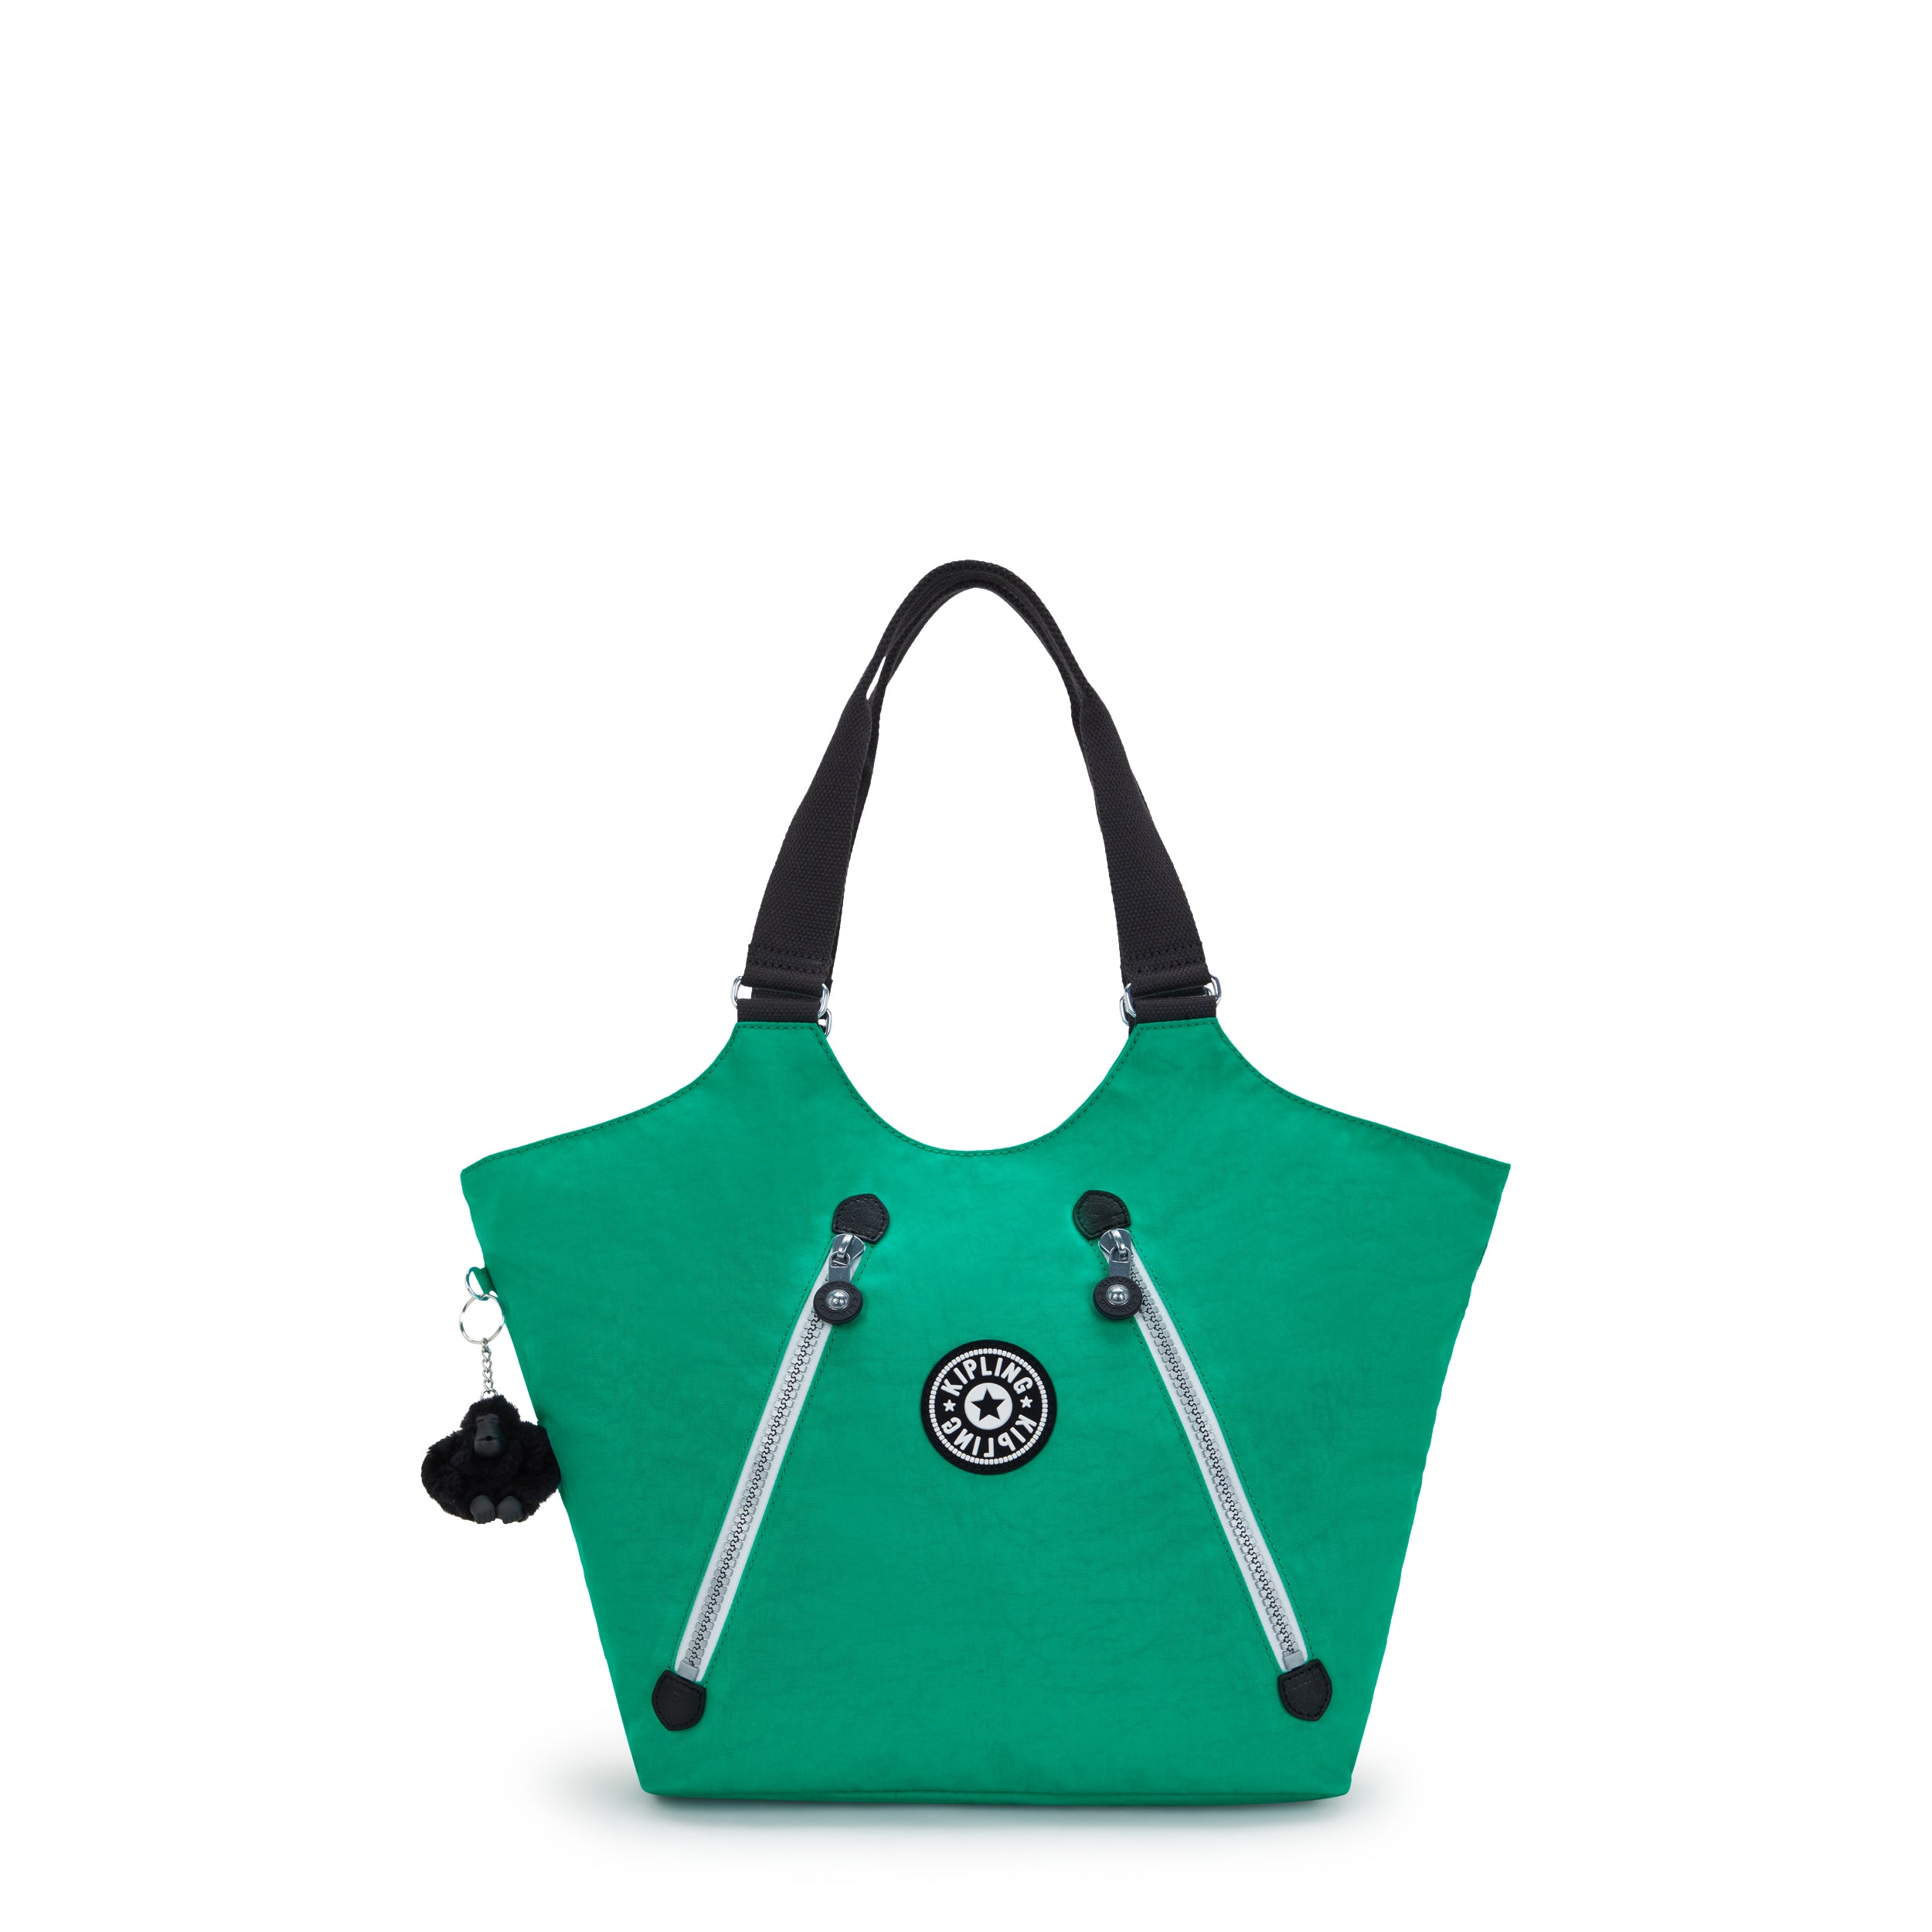 KIPLING-New Cicely-Medium Tote with Zipped Closure-Rapid Green-I2888-AG4